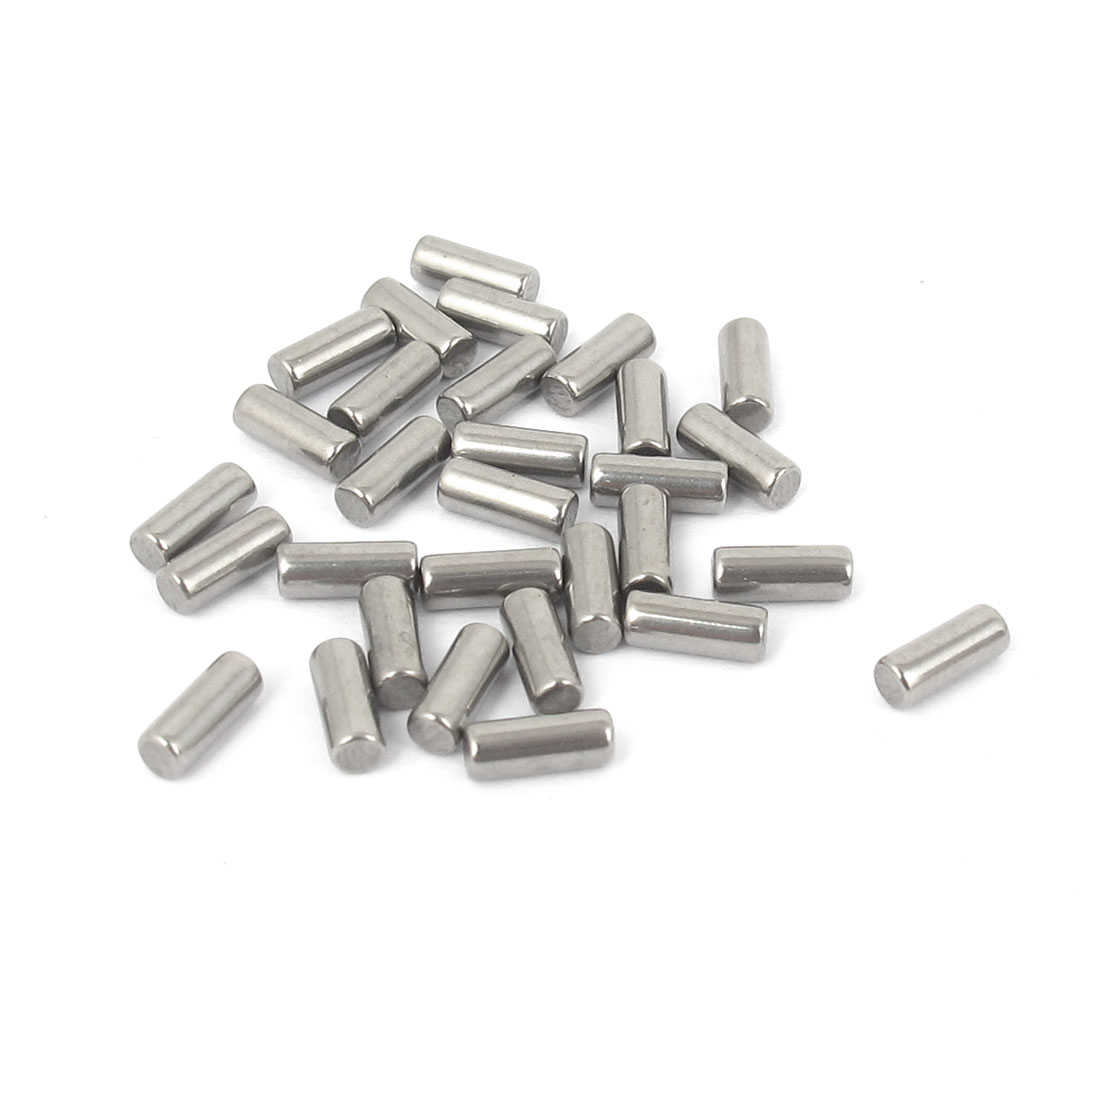 2.5mm x 6mm 304 Stainless Steel Dowel Pins Fasten Elements Silver Tone 30pcs